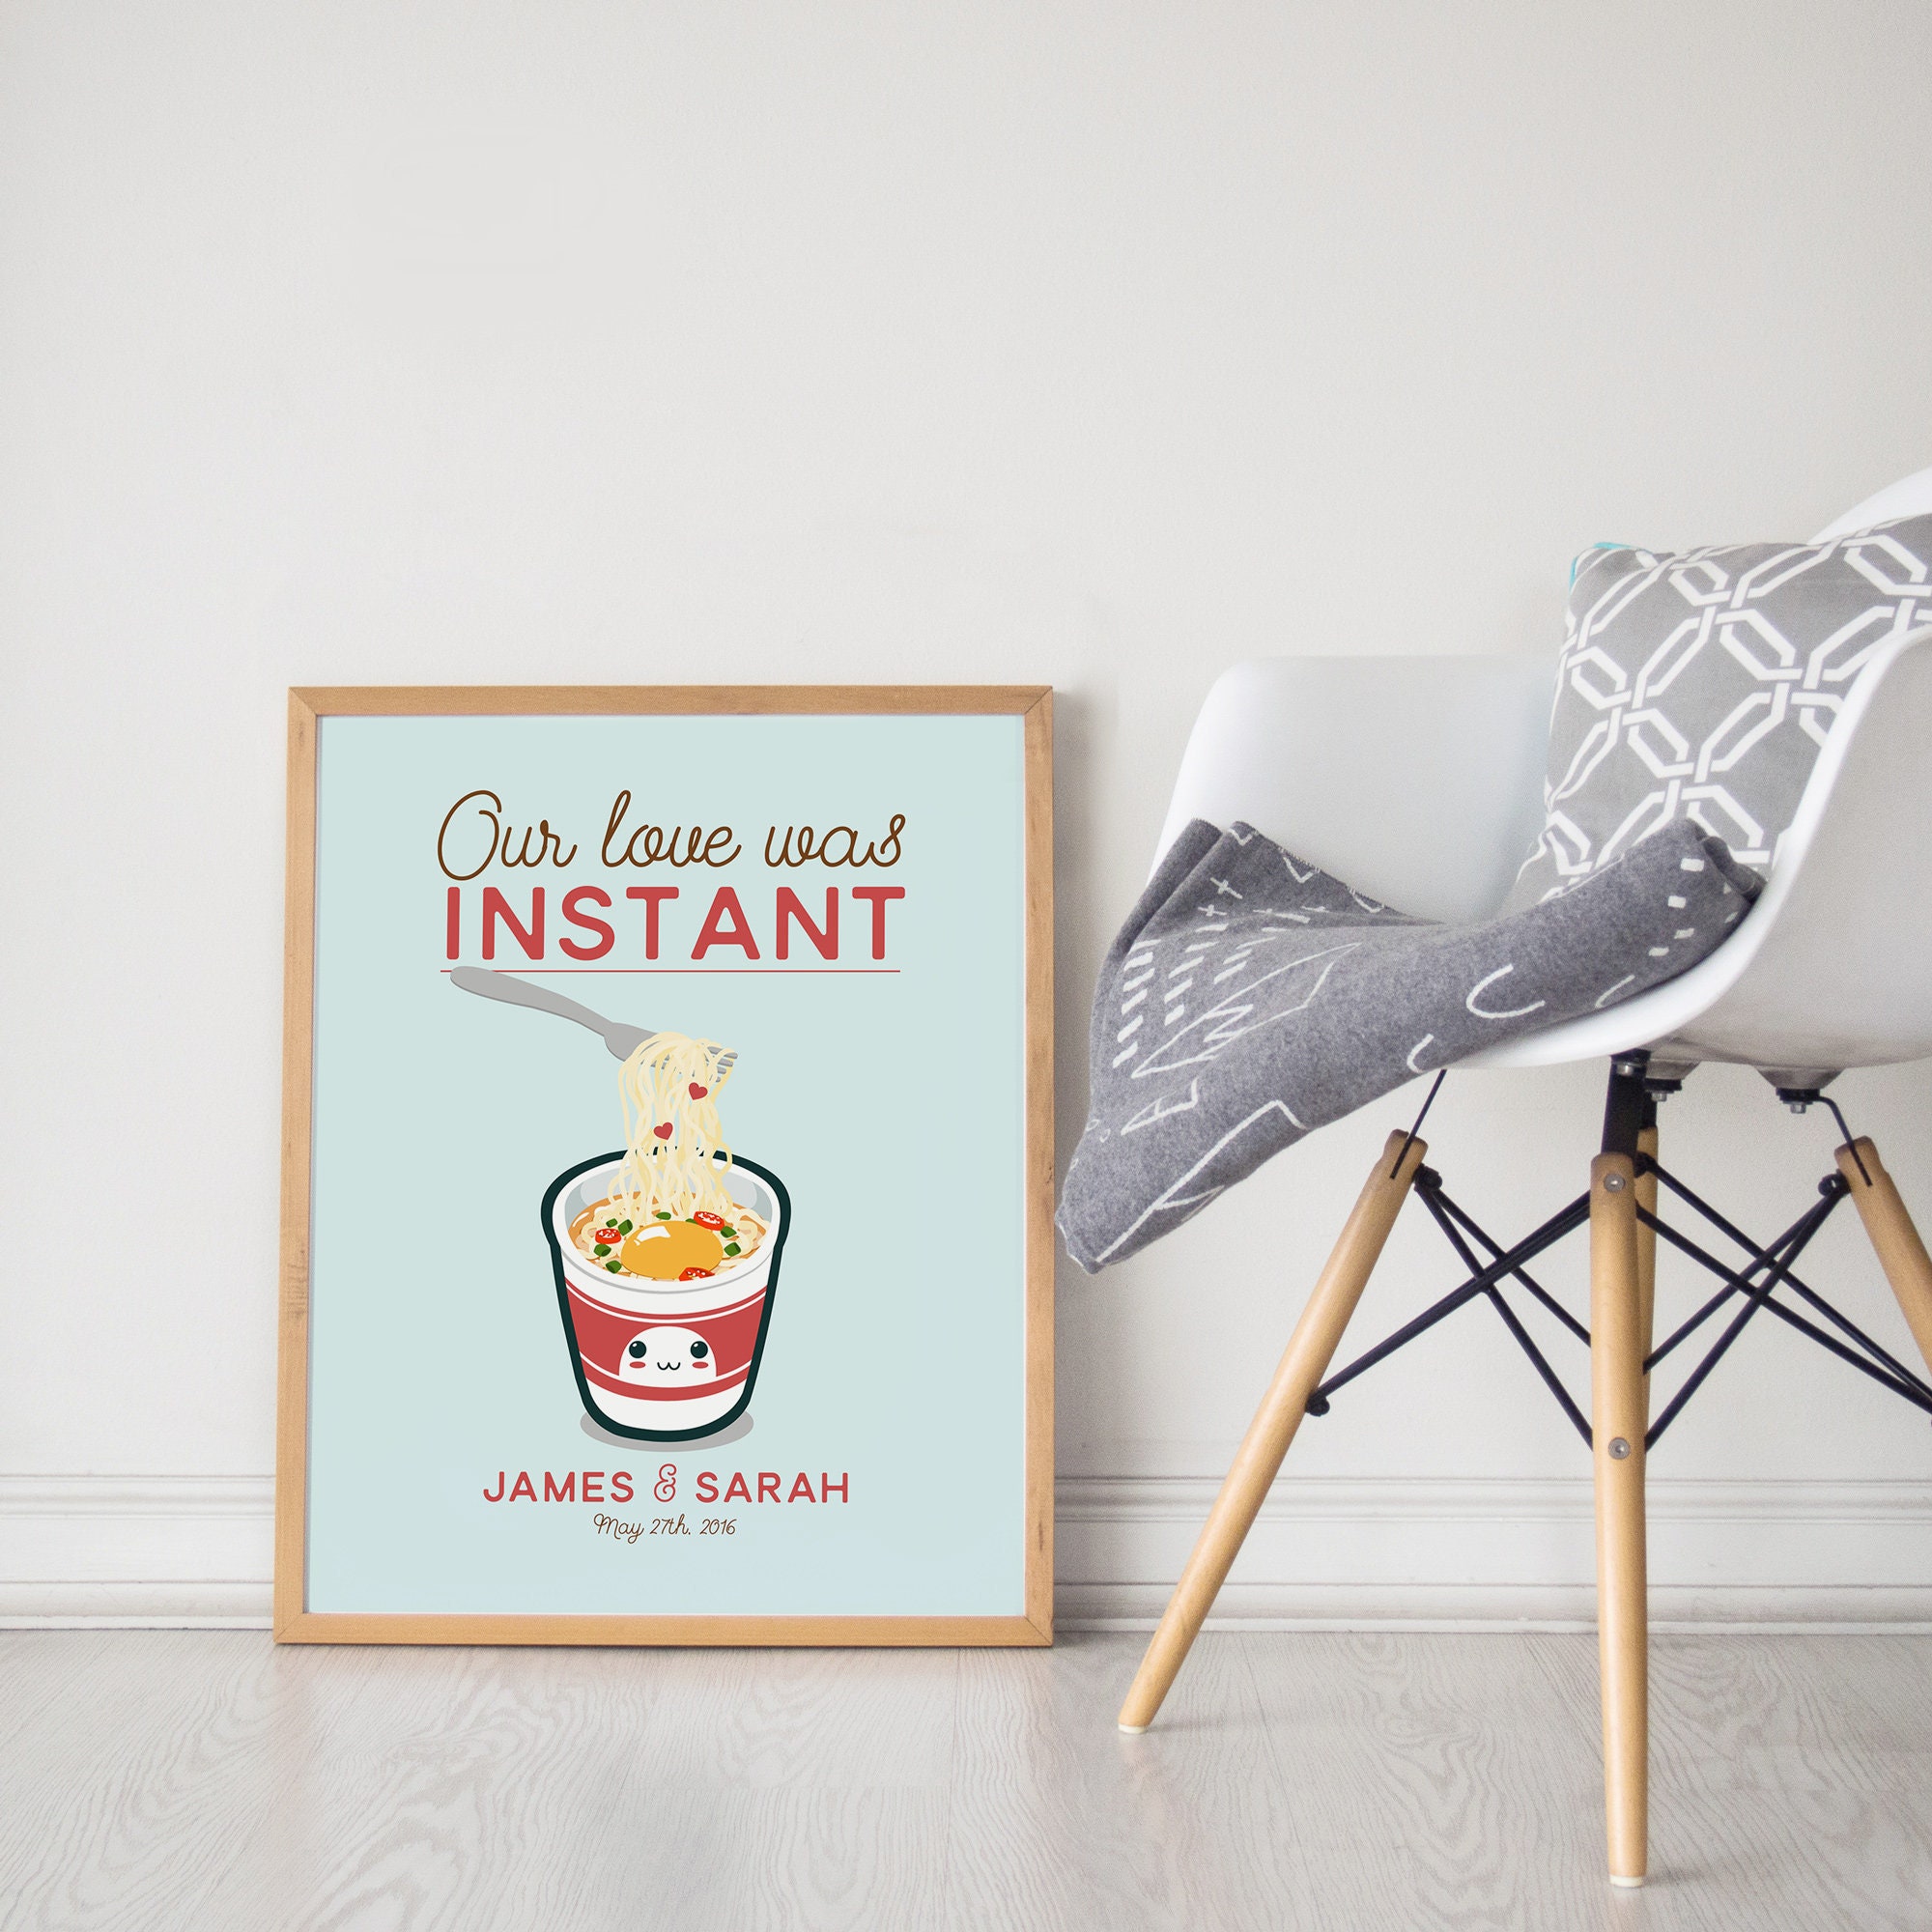 Ramen Noodles Wedding Print - Our Love Was Instant Funny Kawaii Kitchen Wall Decor Art Japanese Food Soup Cup Modern Quote Cute Aqua